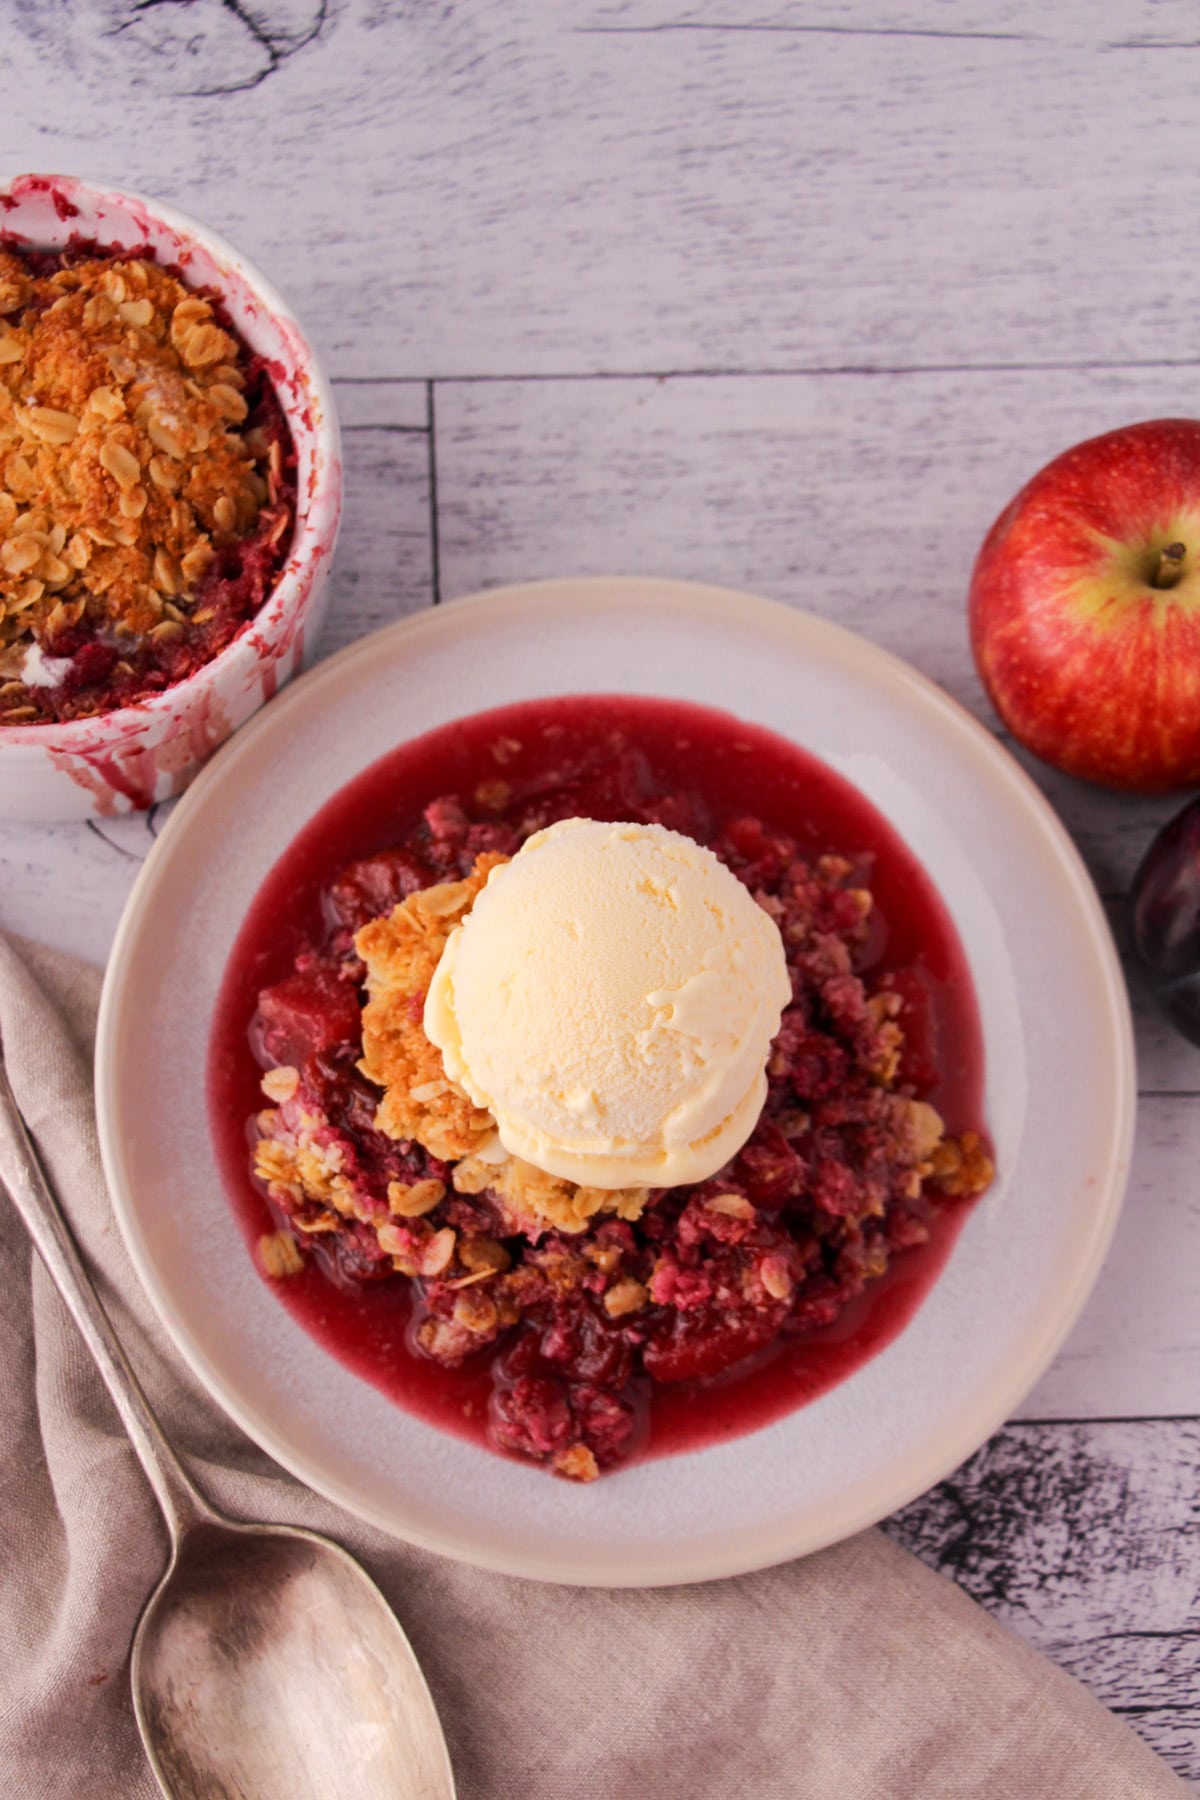 Apple and plum crumble on a plate with ice cream, with vintage serving spoon and ramakin and fresh fruit in the back ground.